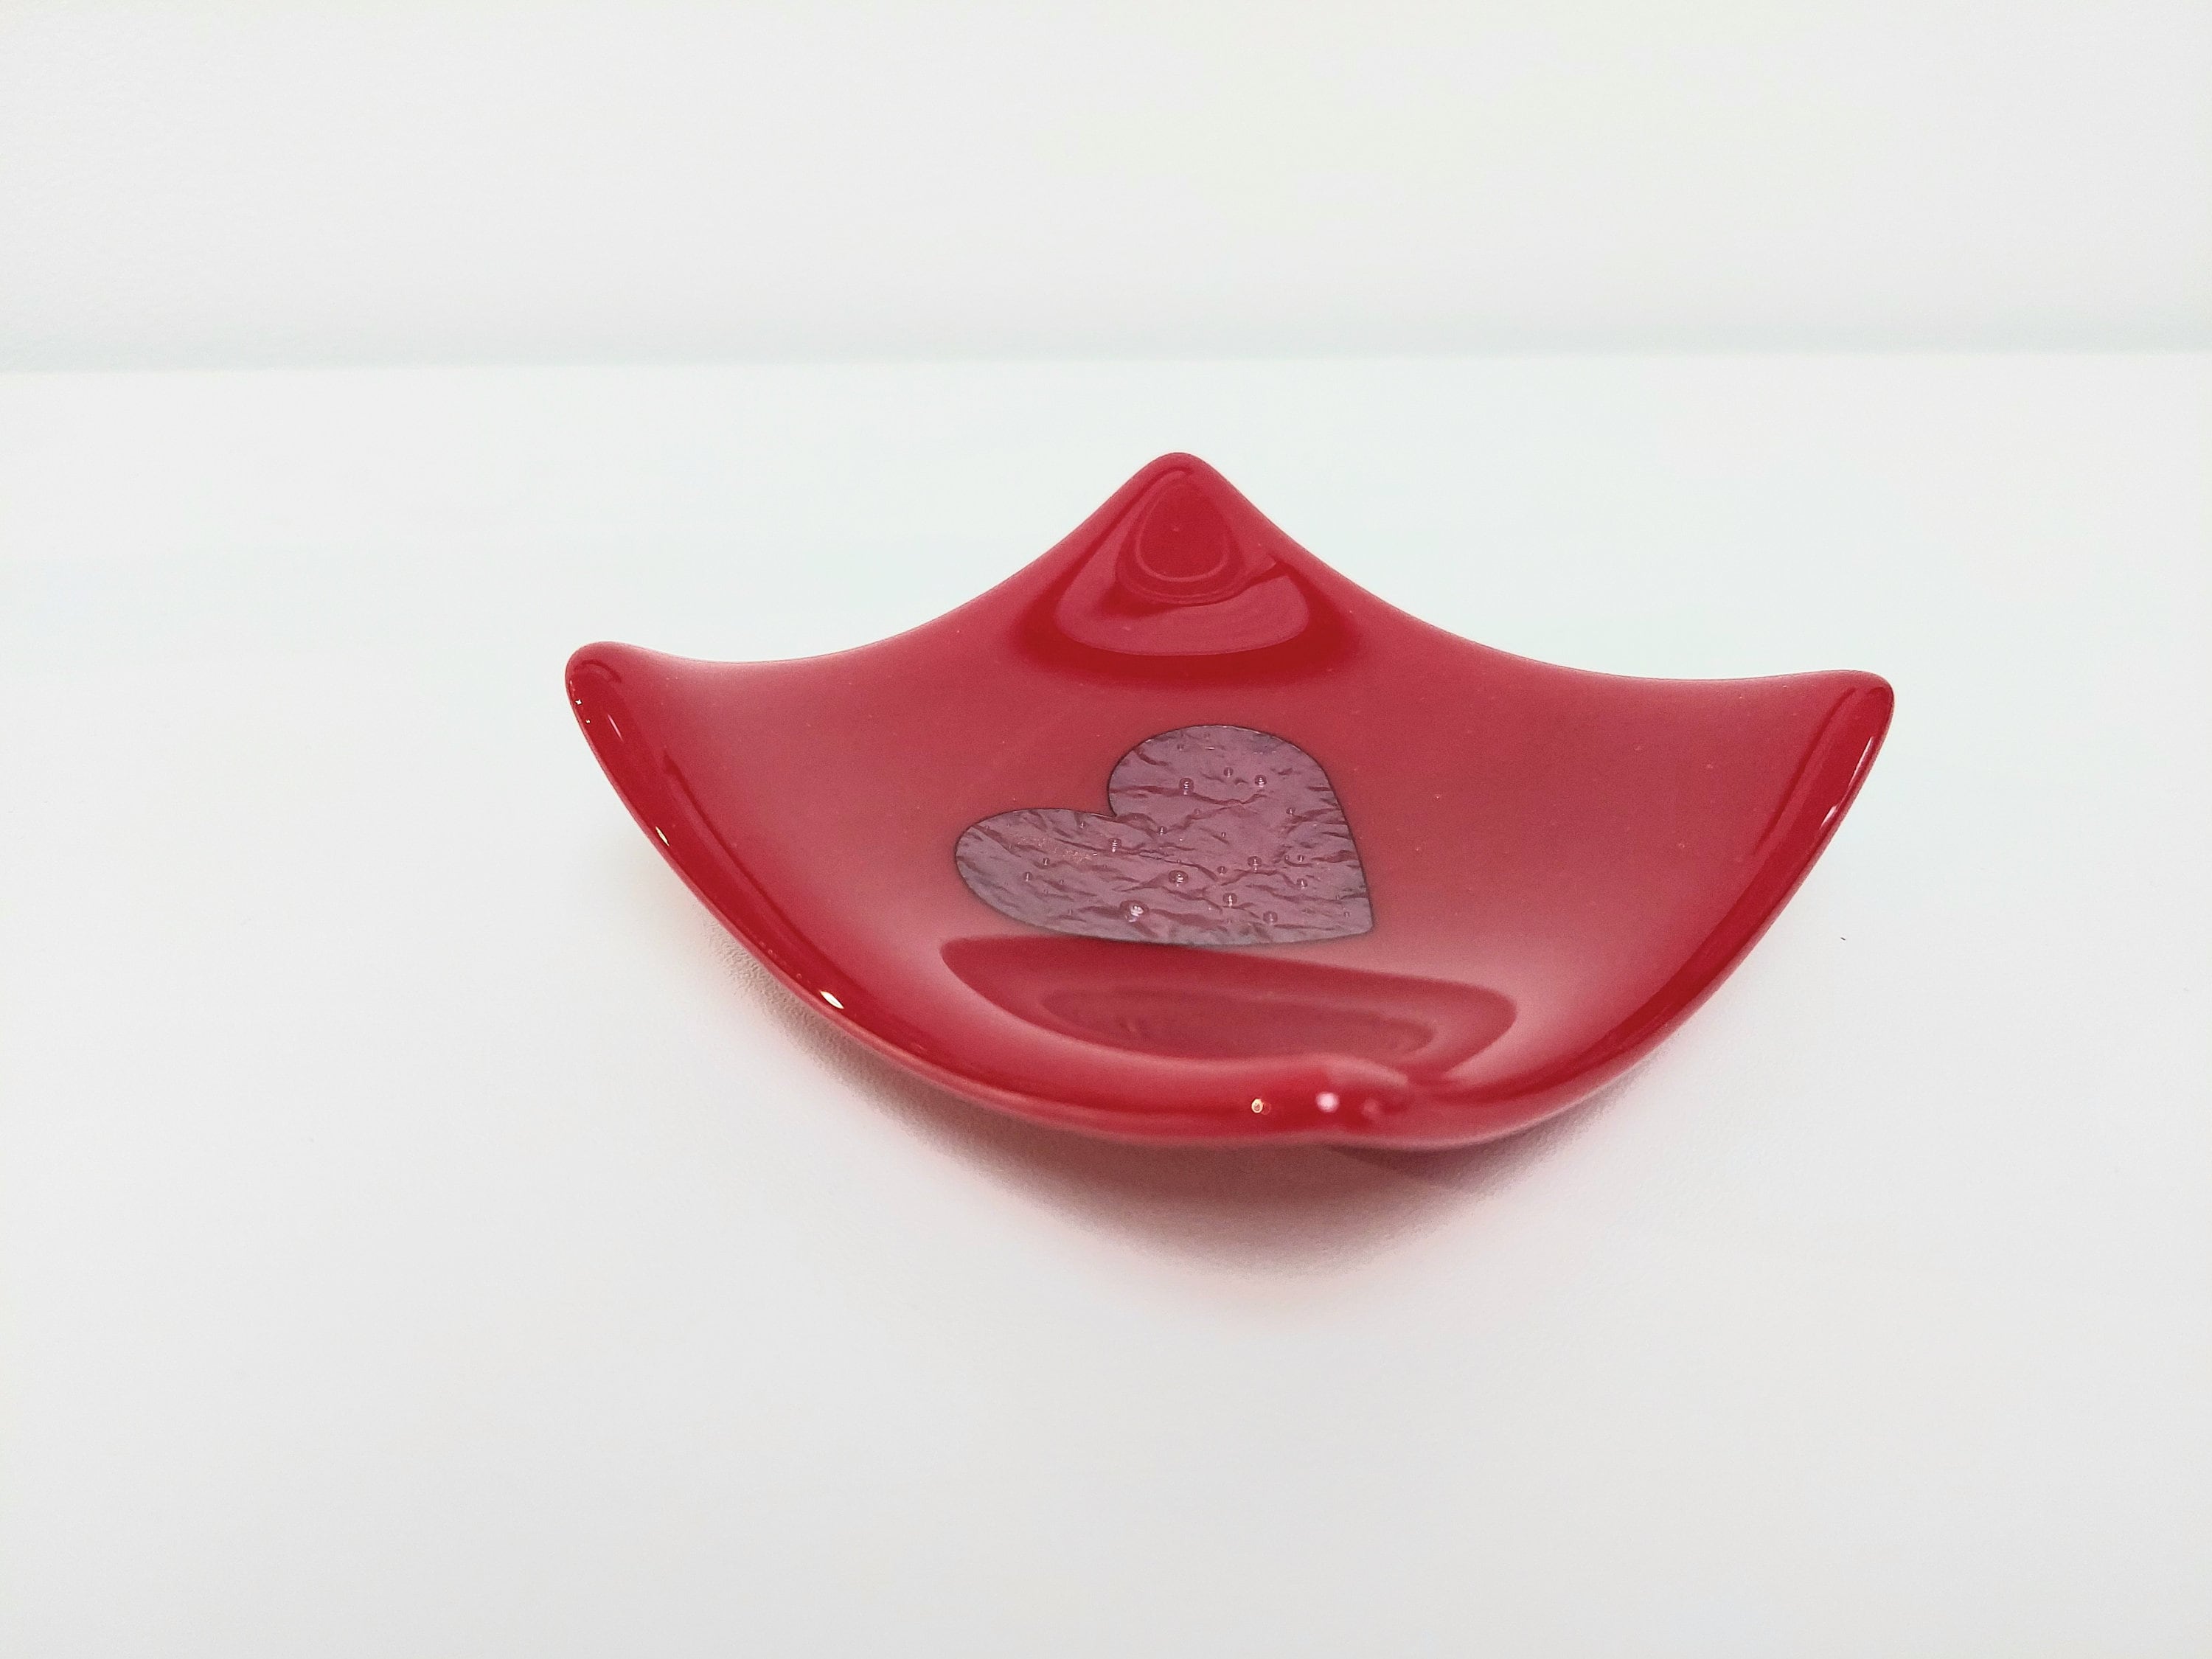 Red Fused Glass Heart Dish, Handmade Opalescent Ring Bowl With A Large Copper Heart, Trinket Bedroom Decor